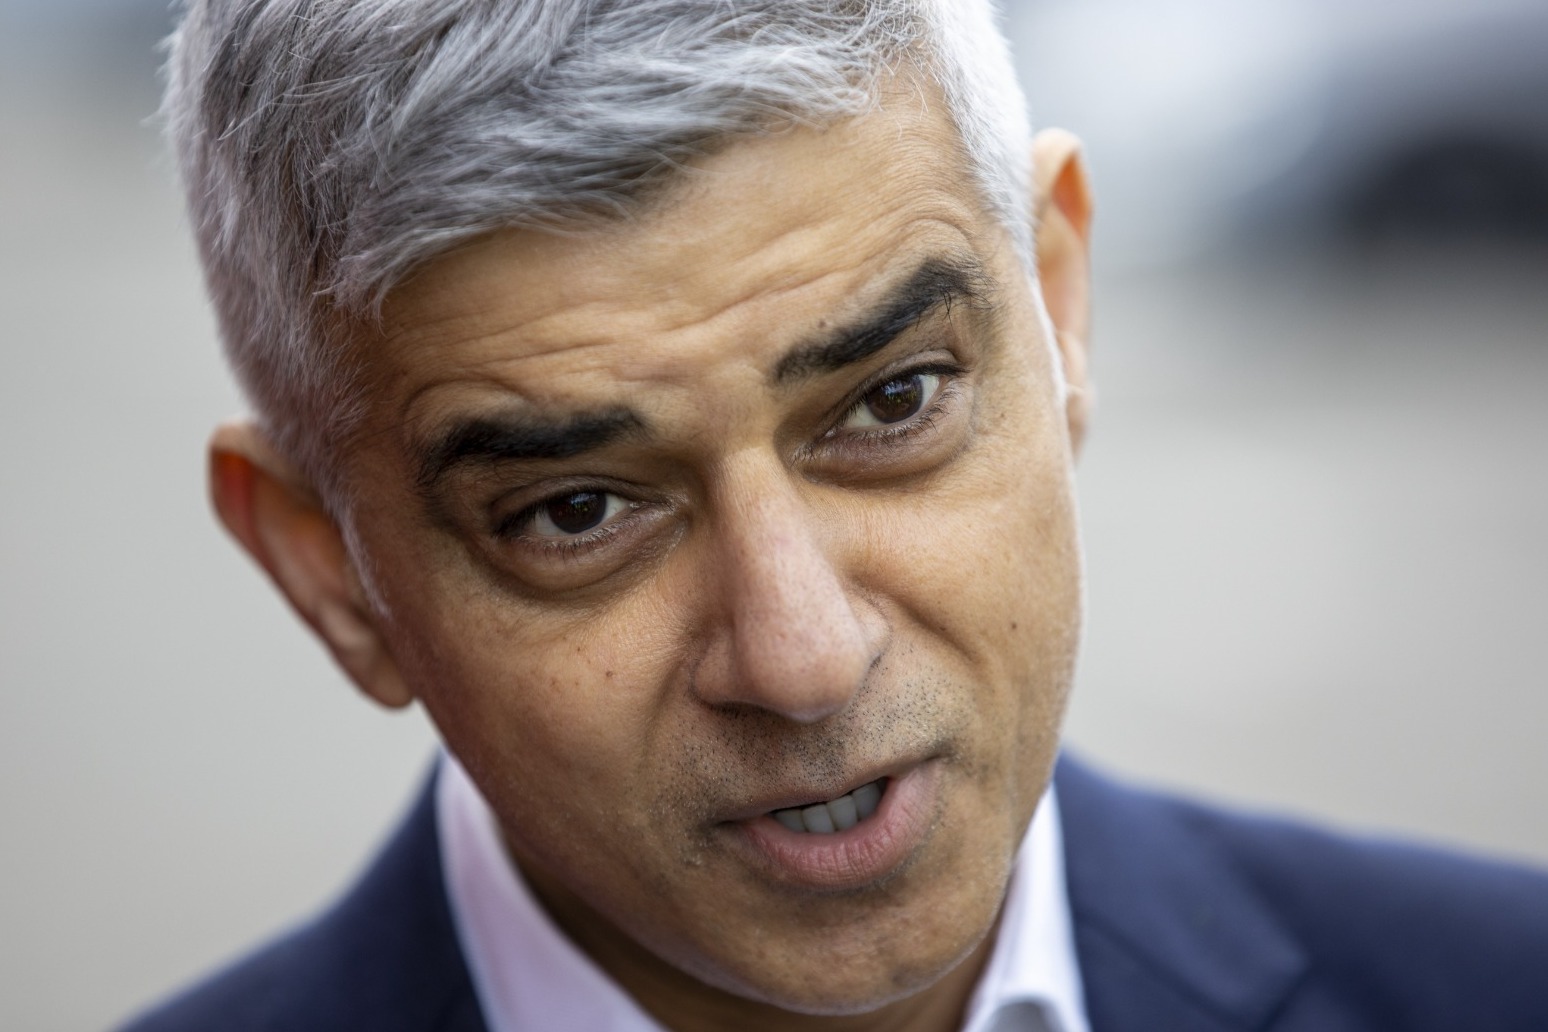 Chelsea must not be sold off as part of fire sale warns Sadiq Khan